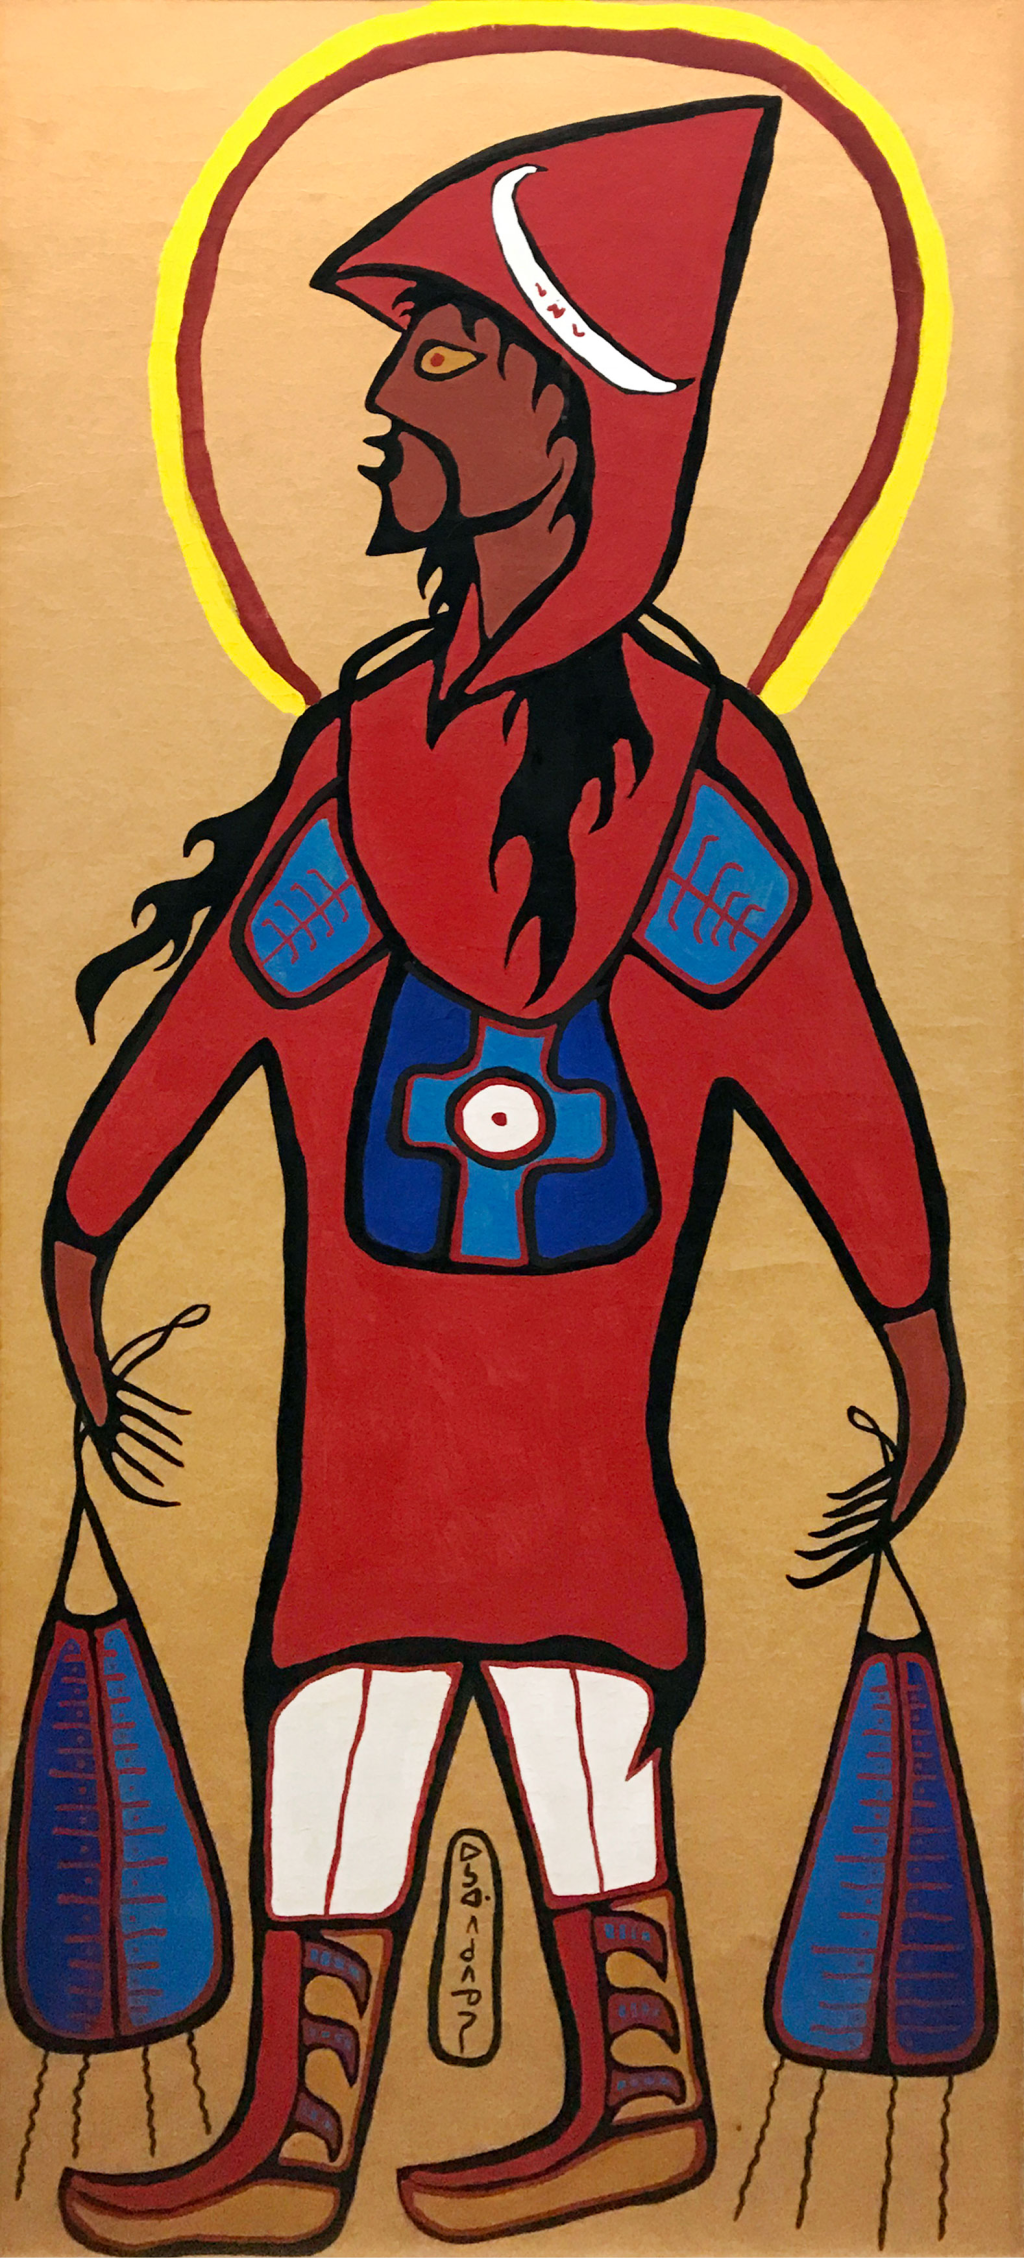 A portrait of Jesus Christ as part of the Ojibwe society